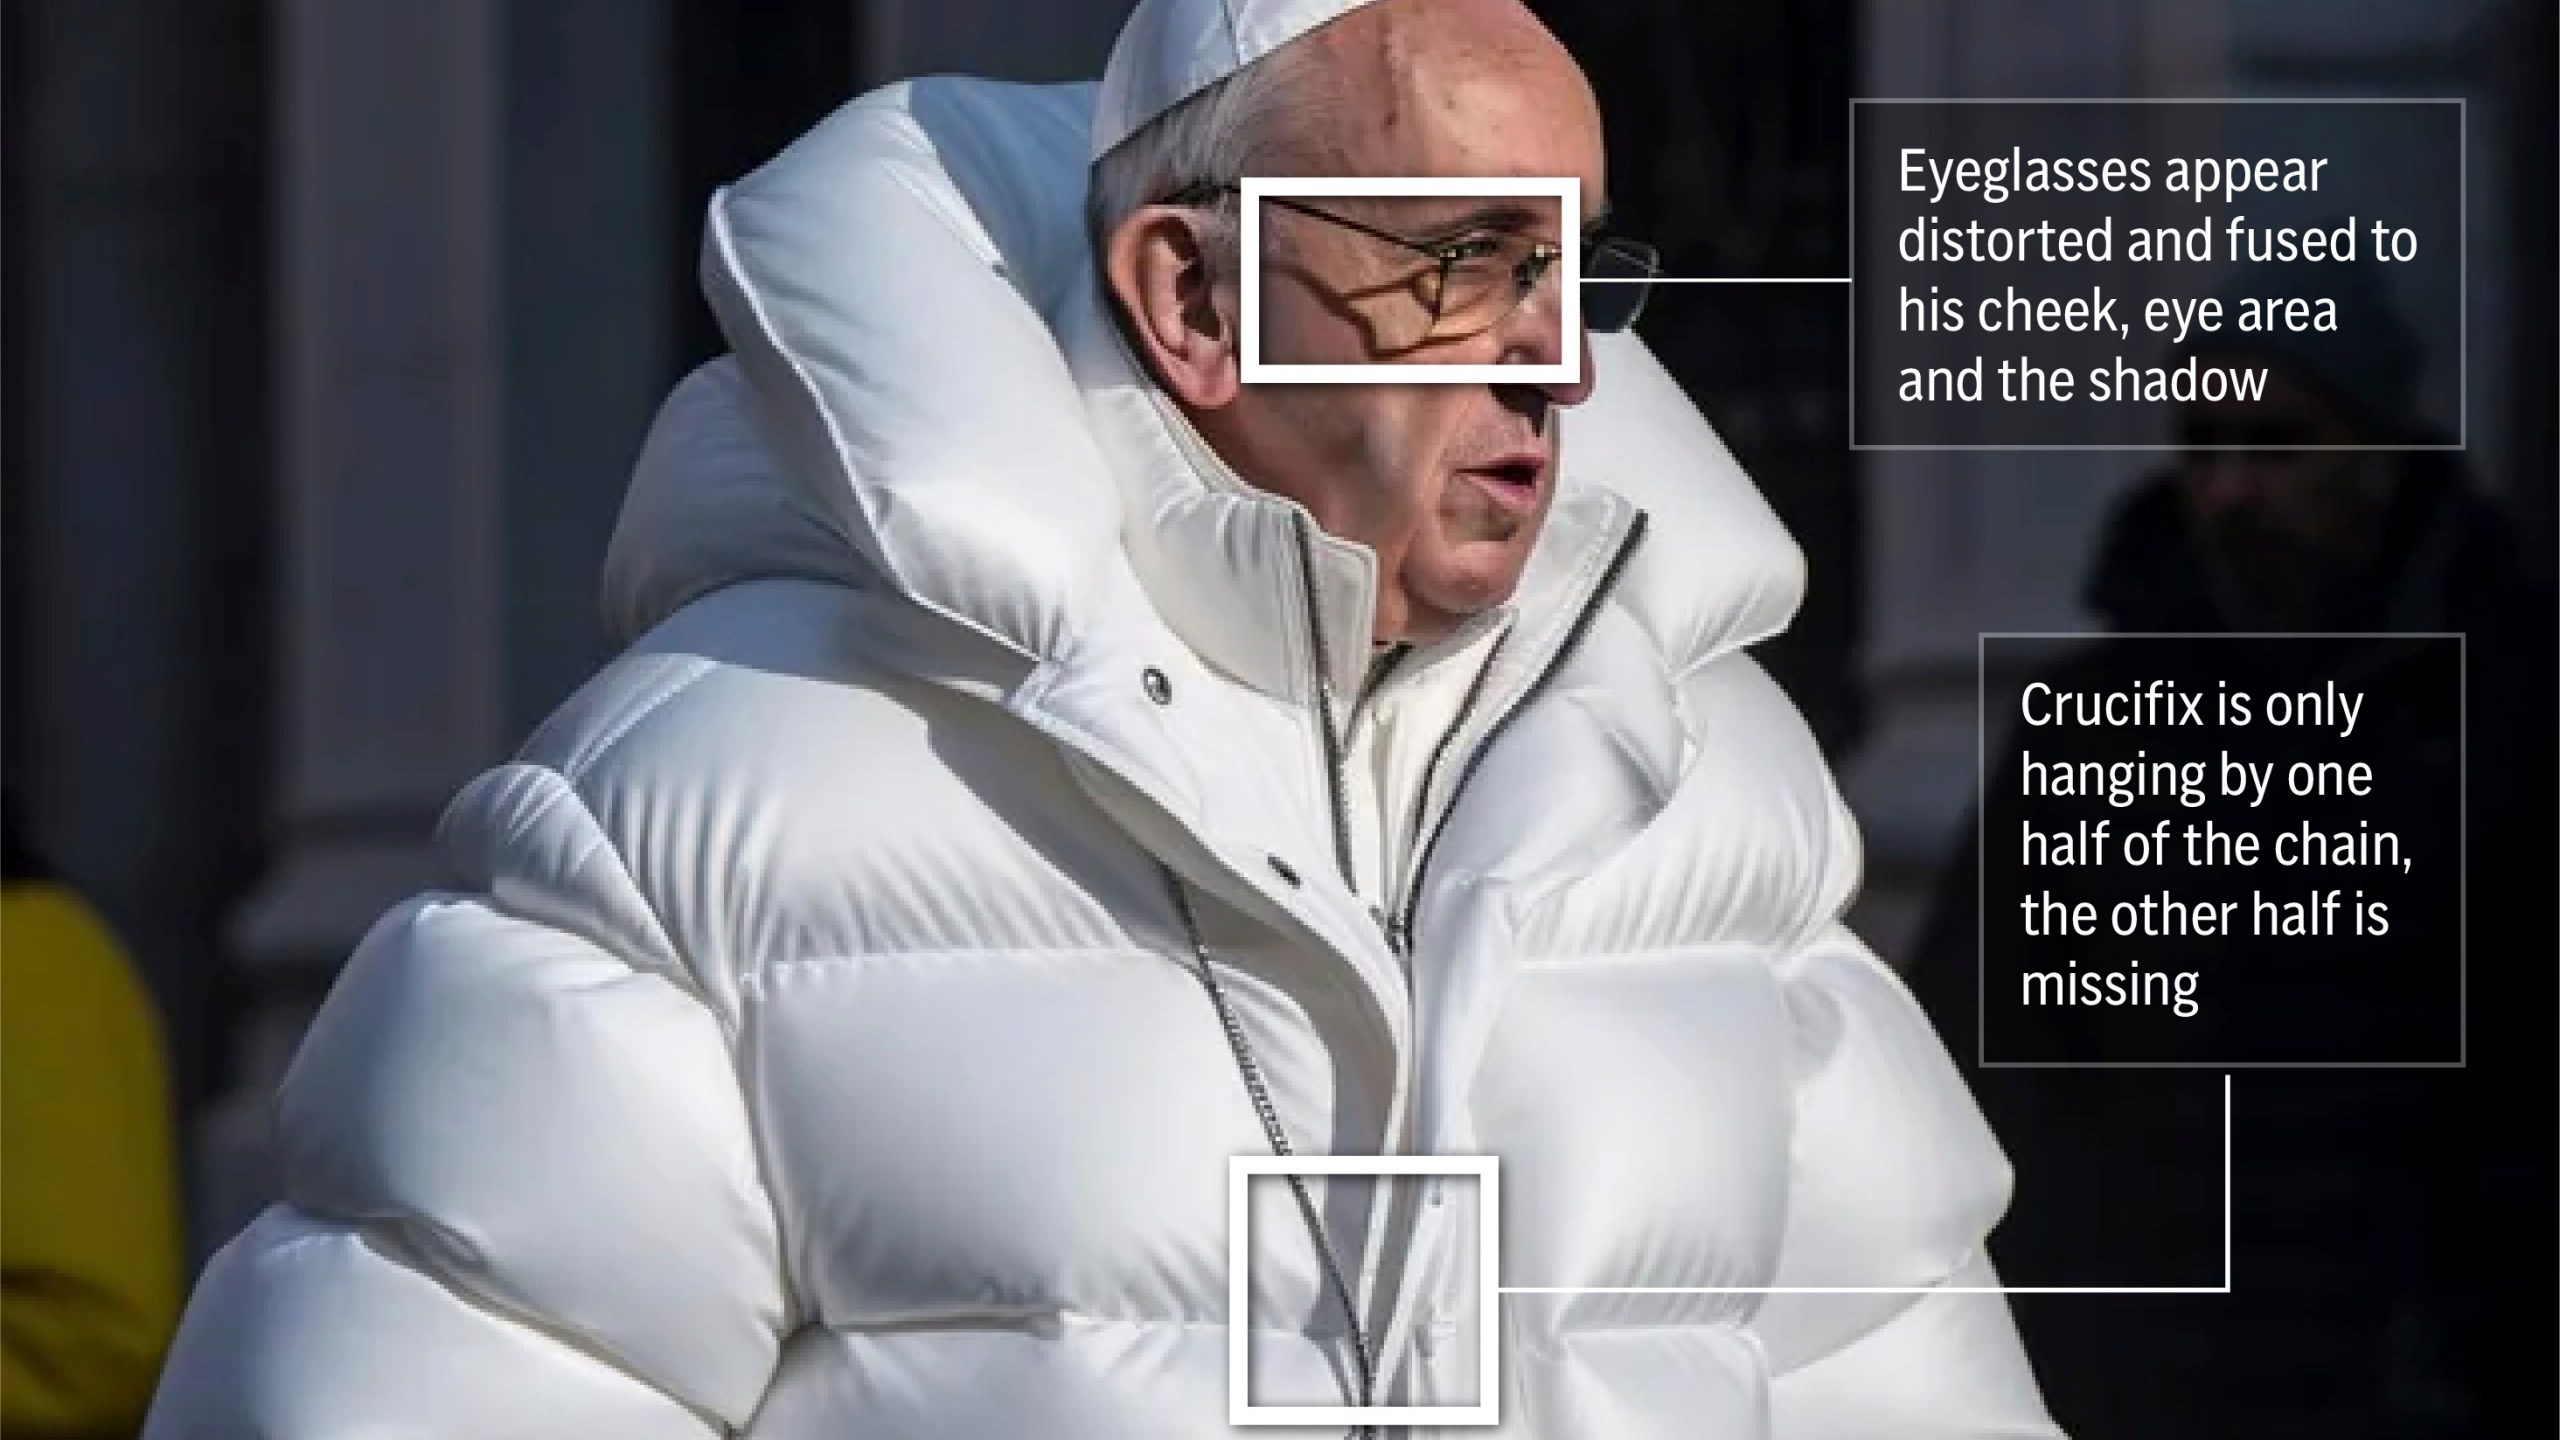 AI fakery is quickly becoming one of the biggest problems confronting us online. With AI deepfakes cropping up almost every day, depicting everyone from Taylor Swift to Donald Trump, it’s getting harder to tell what’s real from what’s not. The following photo-illustrated graphic highlights a few notable areas of an AI-deepfake of Pope Francis.